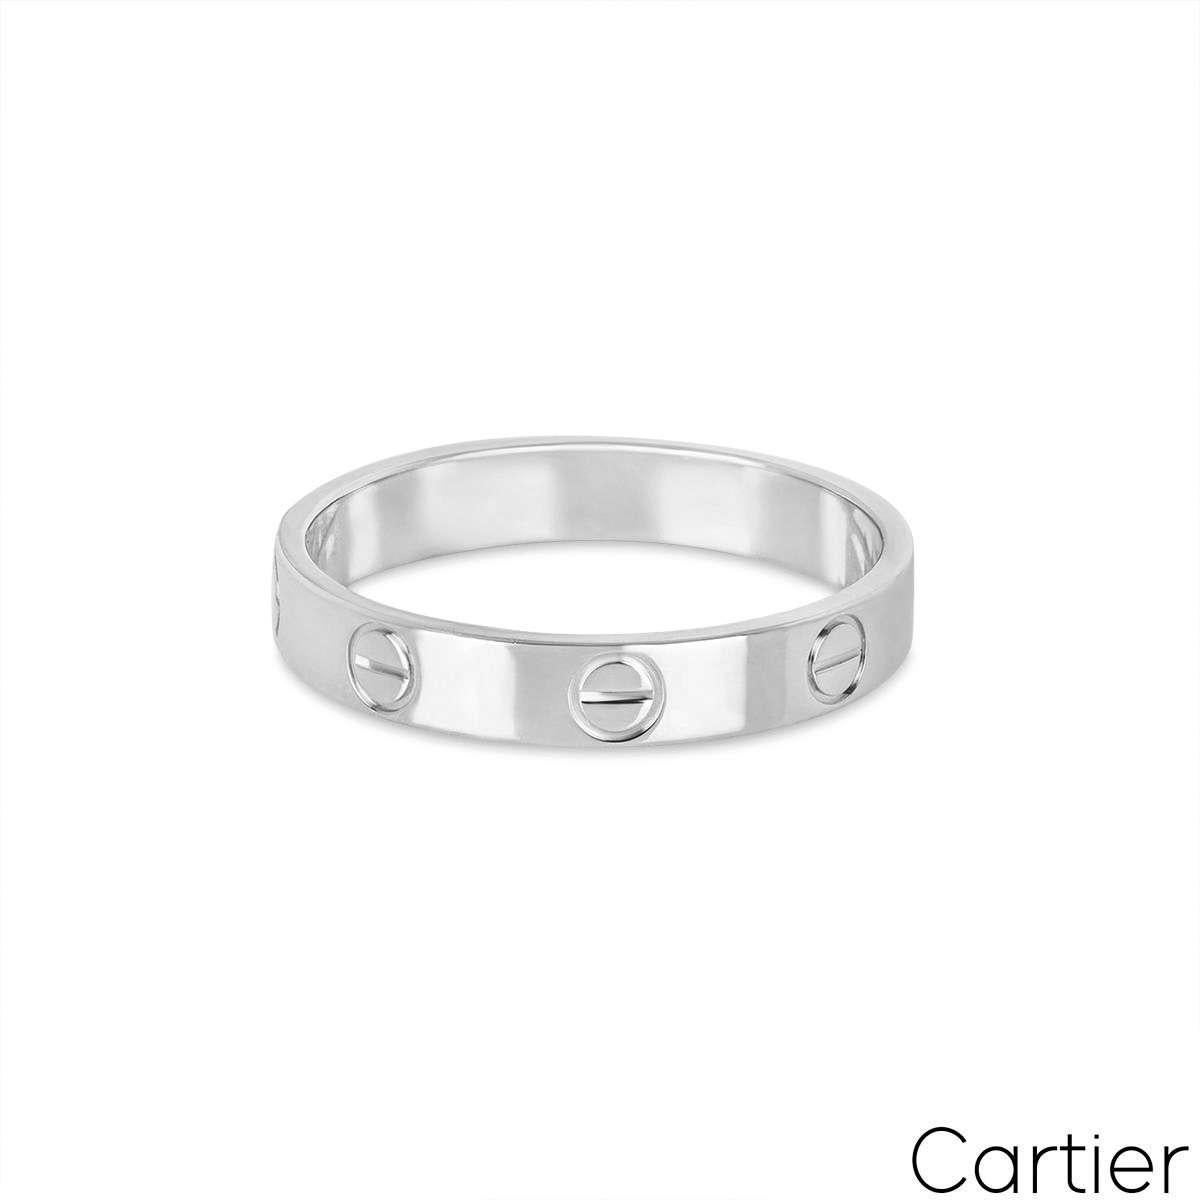 Cartier White Gold Plain Love Wedding Band Size 54 B4085100 In Excellent Condition For Sale In London, GB